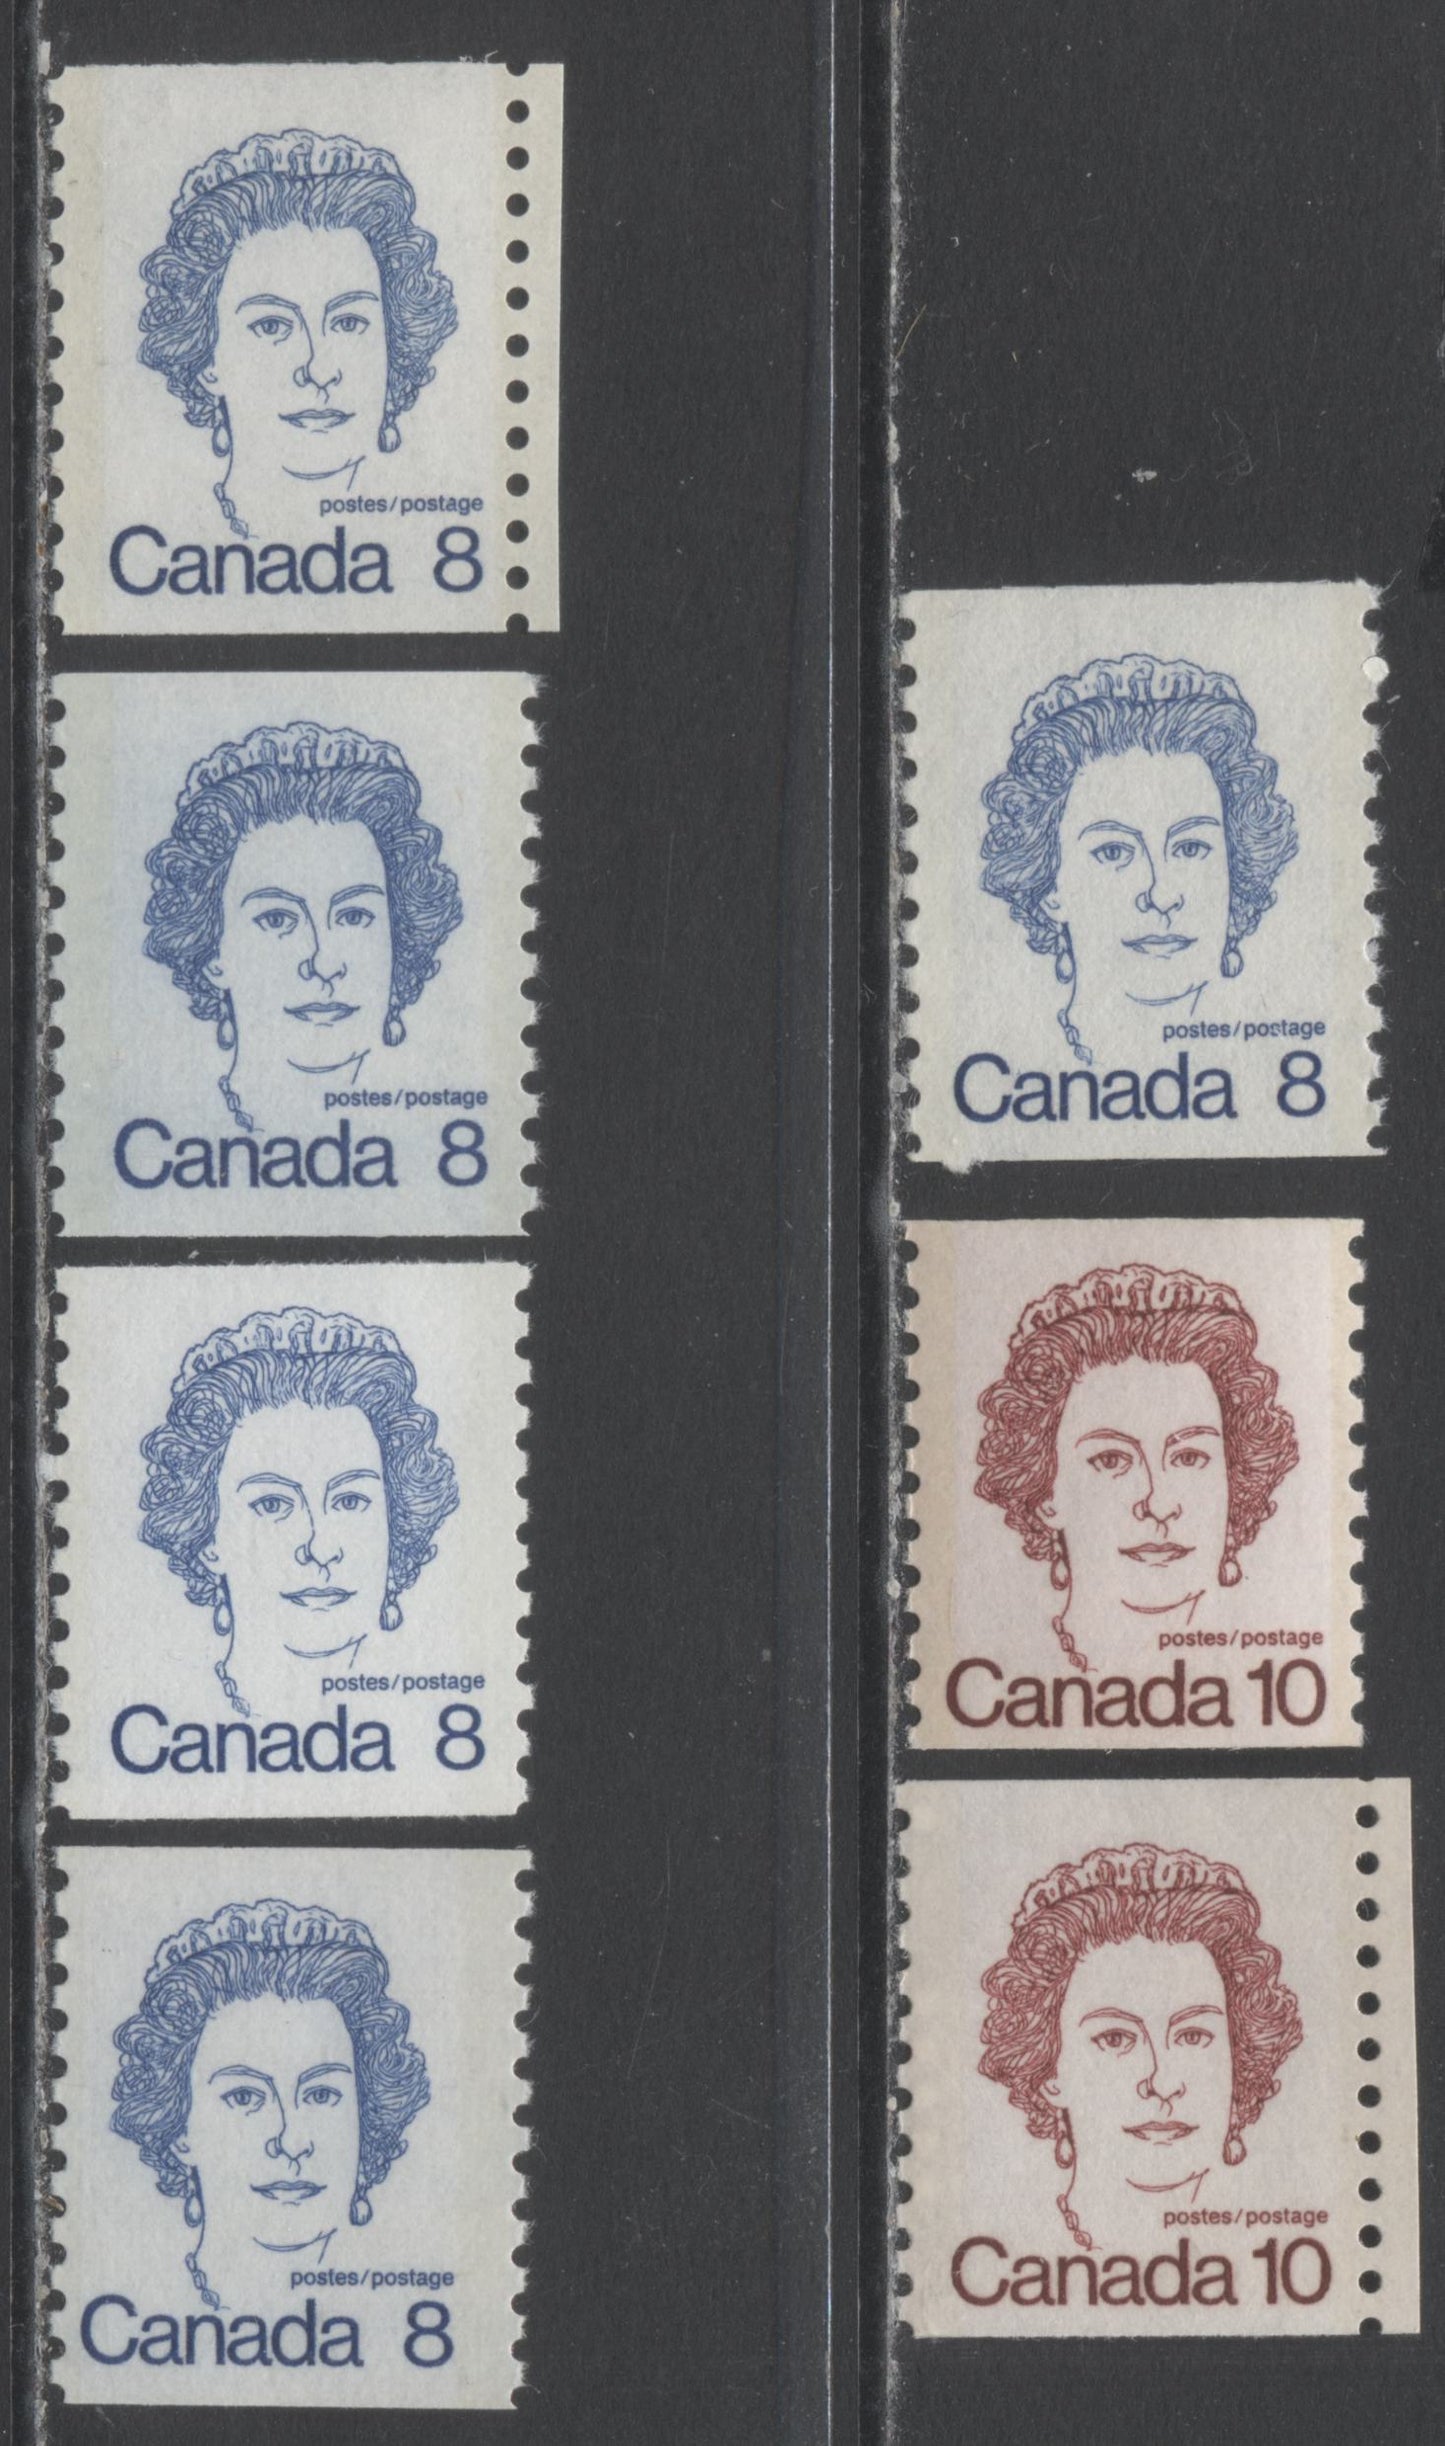 Lot 337 Canada #604-604viii, 605iii 8c,10c Royal Blue, Dark Carmine Queen Elizabeth II, 1974 - 1976 Caricature Definitives - Coil Stamps Issue, 7  Singles On NF, DF, LF, HF, HB Papers